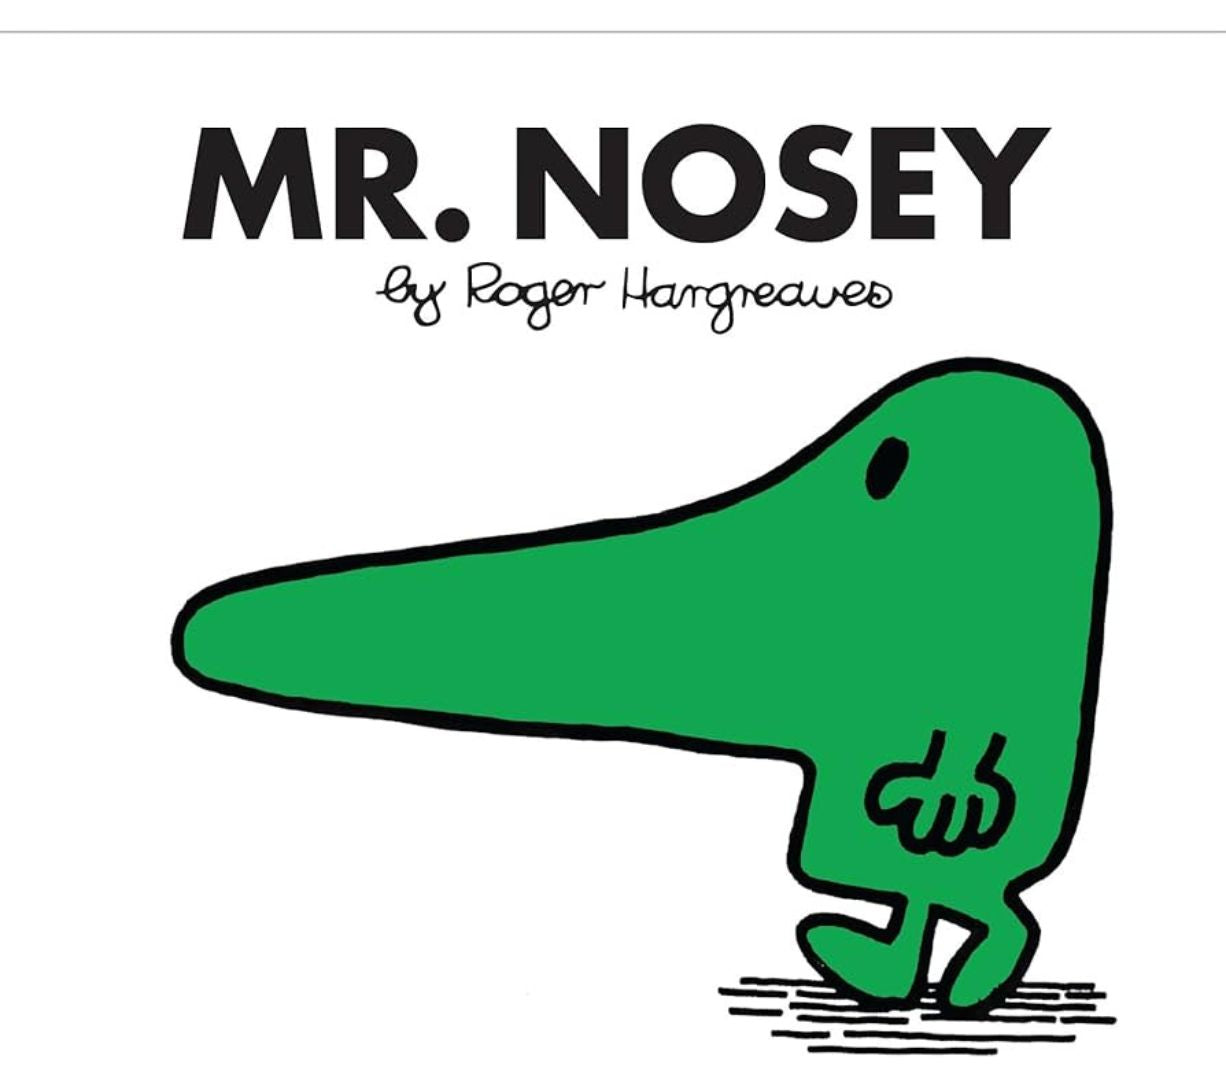 Mr. Nosey